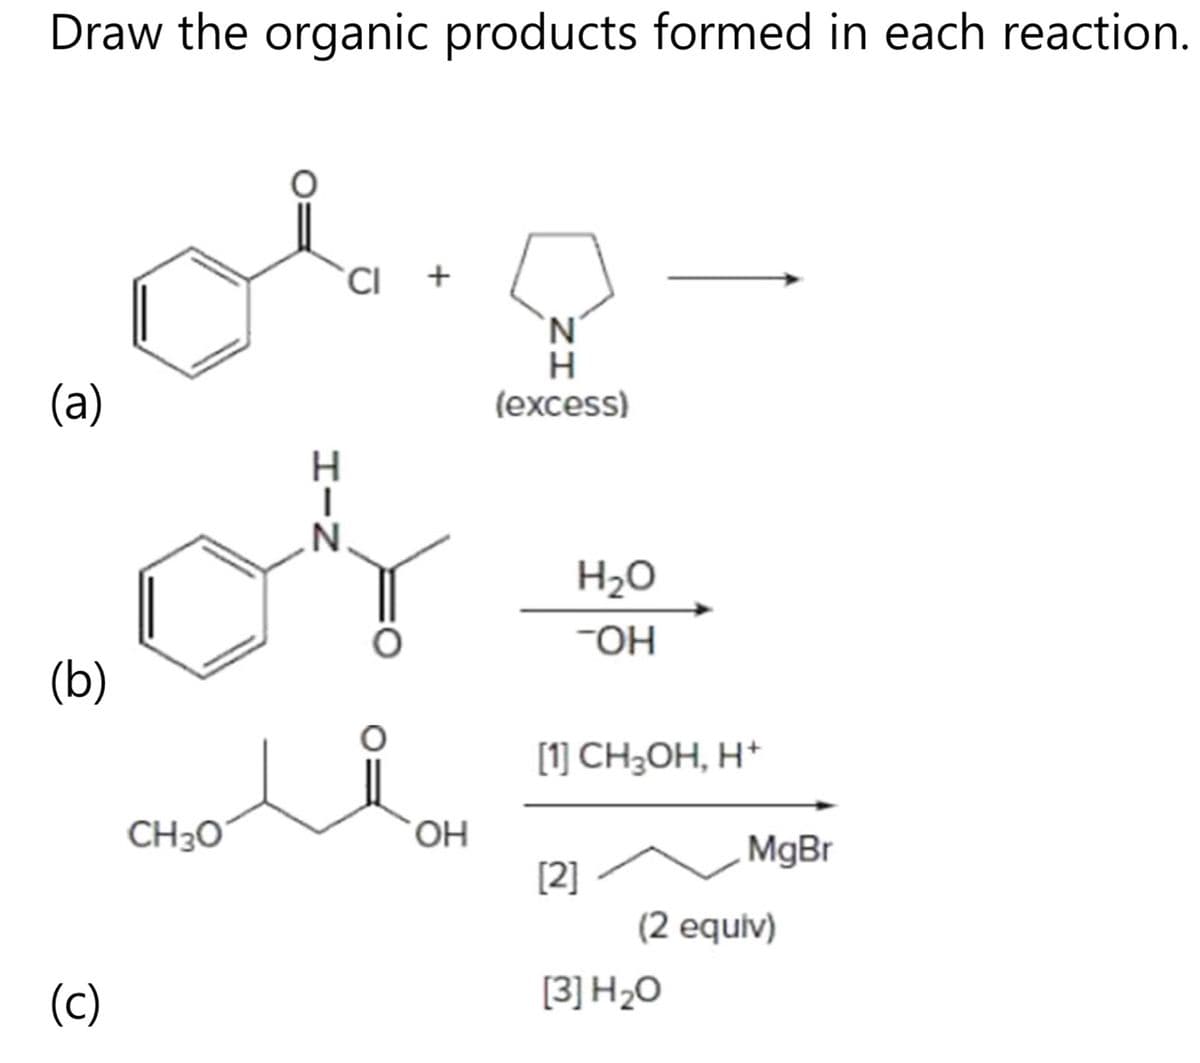 Draw the organic products formed in each reaction.
(a)
(b)
(c)
CH 30
HIN
CI +
OH
N
H
(excess)
H₂O
-OH
[1] CH₂OH, H+
[2]
MgBr
(2 equiv)
[3] H₂O